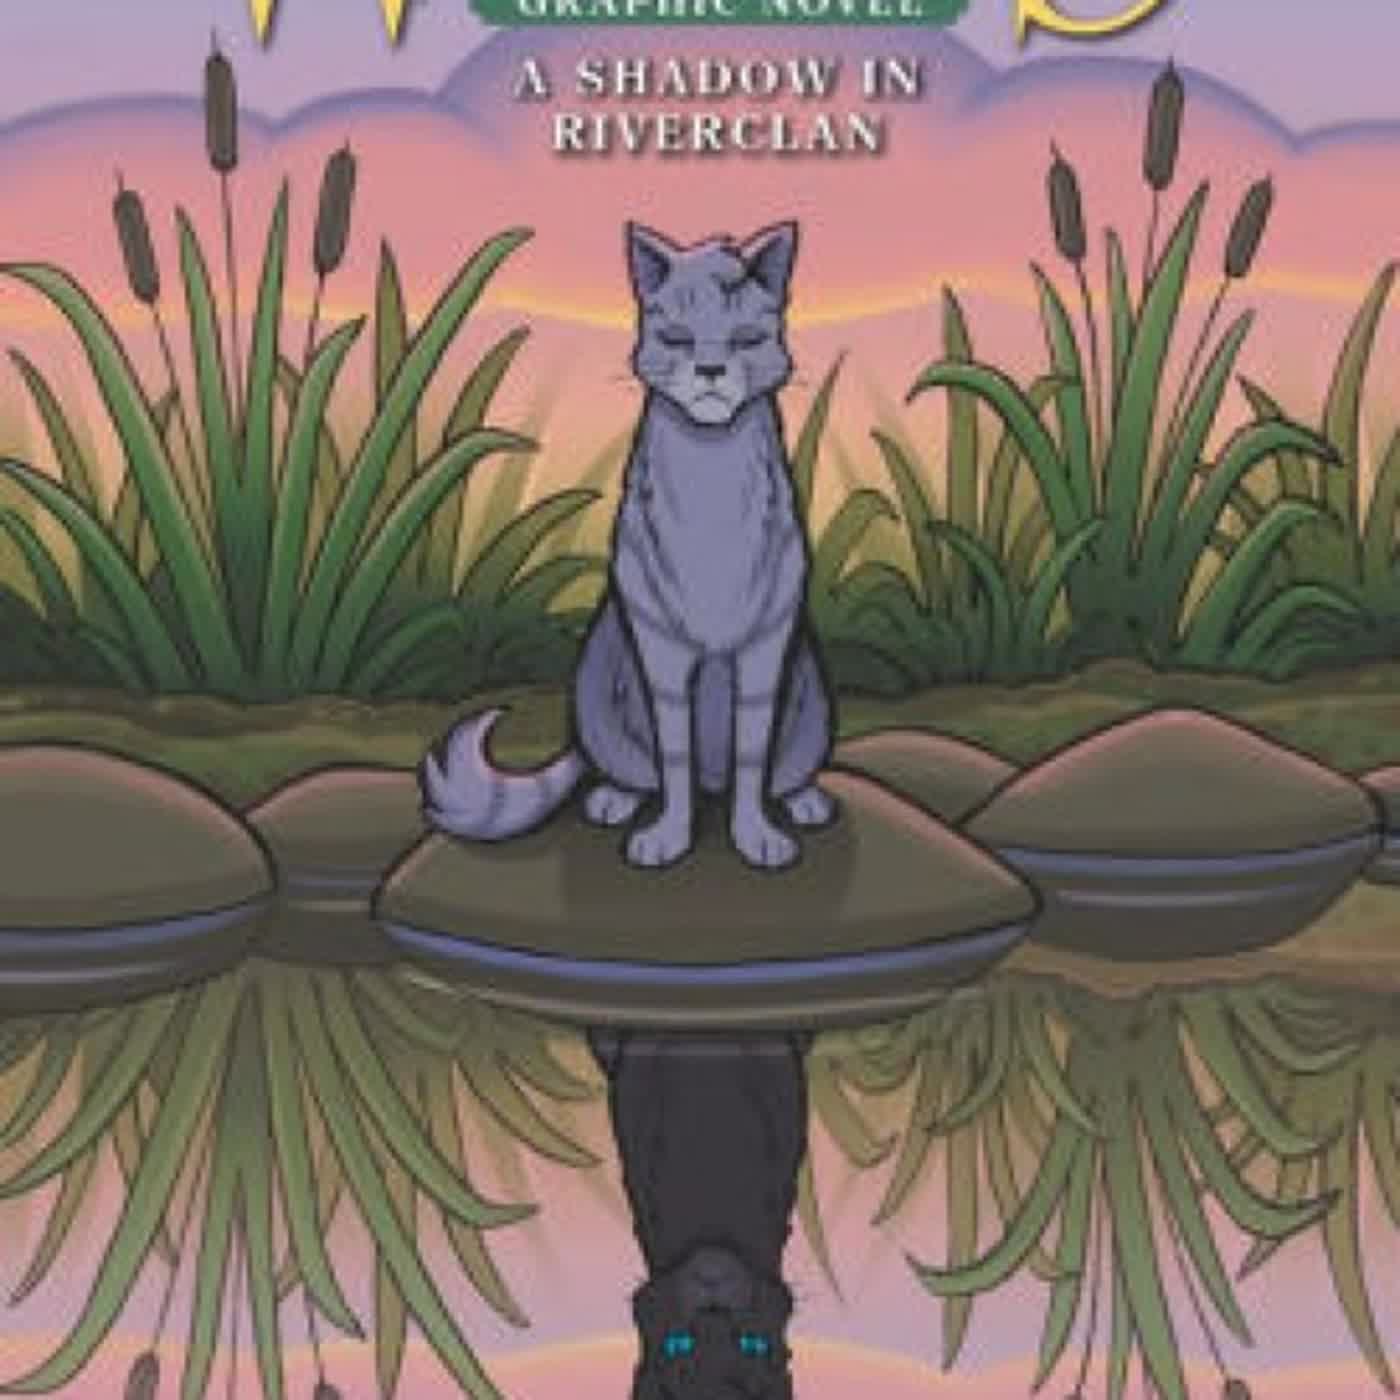 Warriors: A Shadow in RiverClan by Erin Hunter, James L. Barry on Iphone New Format